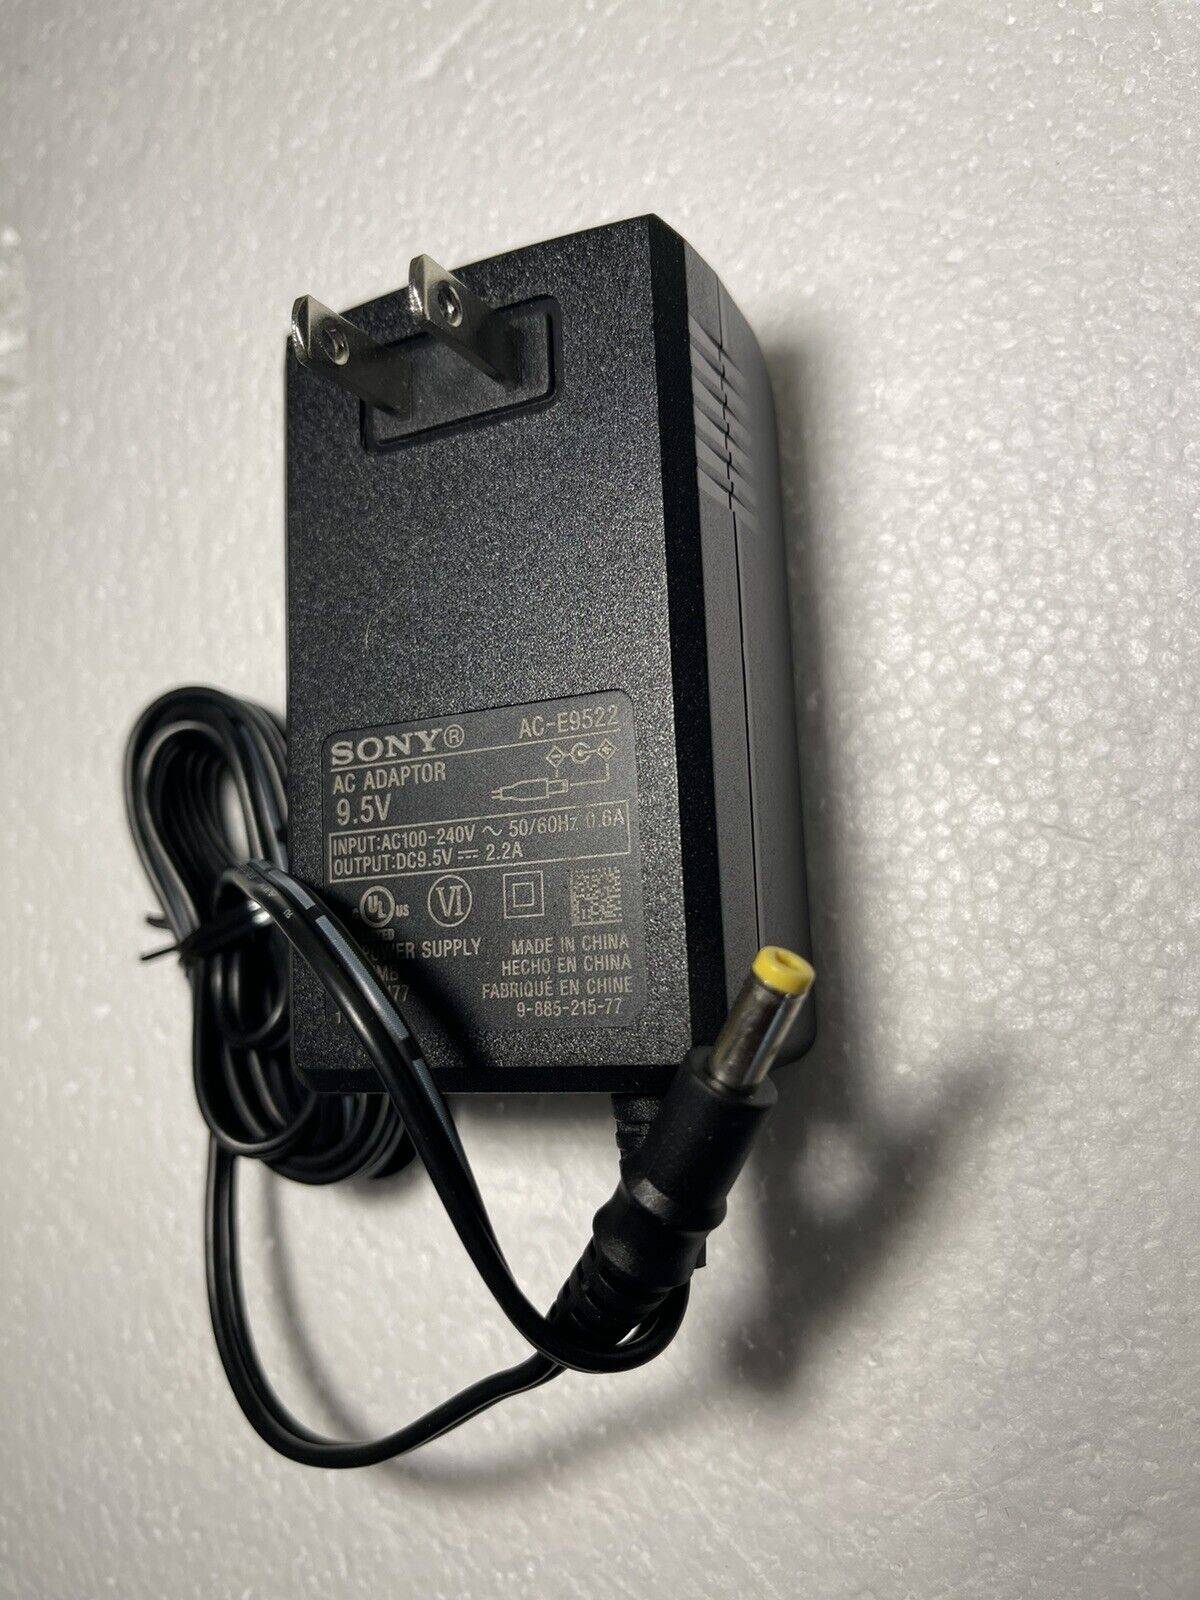 SONY SRS-XB40 Charger AC-E9522 AC Power Adapter / Supply 9.5v 2.2A Genuine  Sony